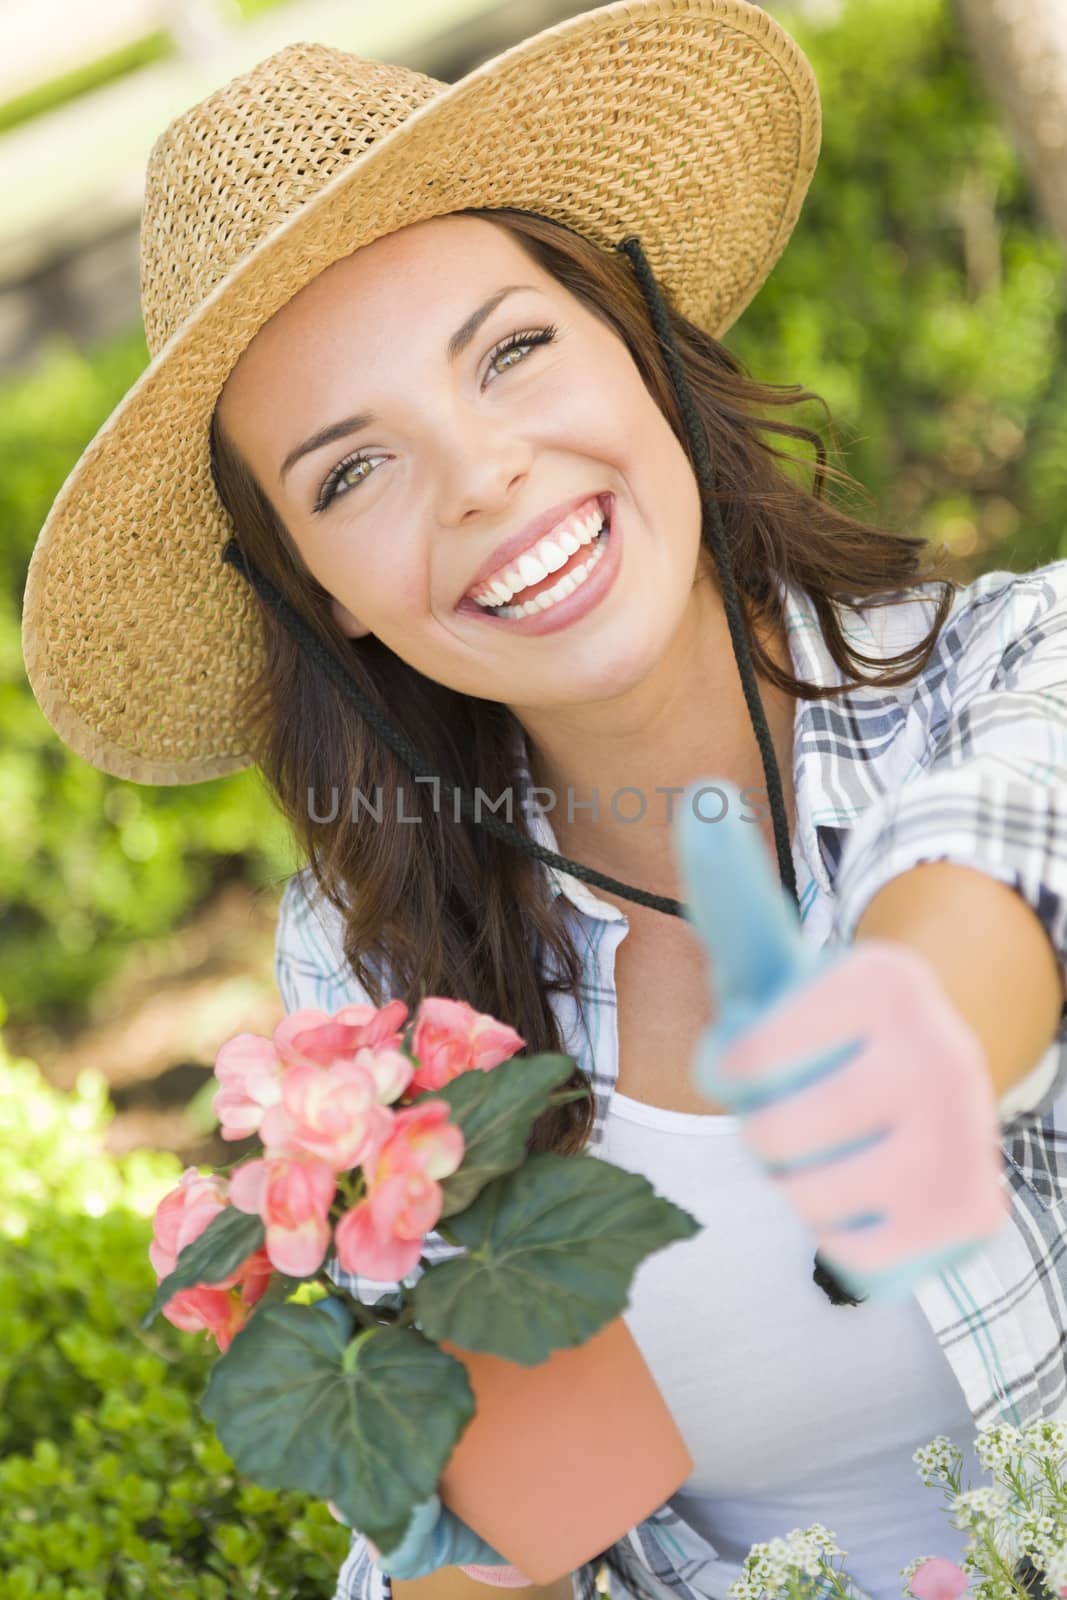 Young Adult Woman Wearing Hat Gardening Outdoors by Feverpitched